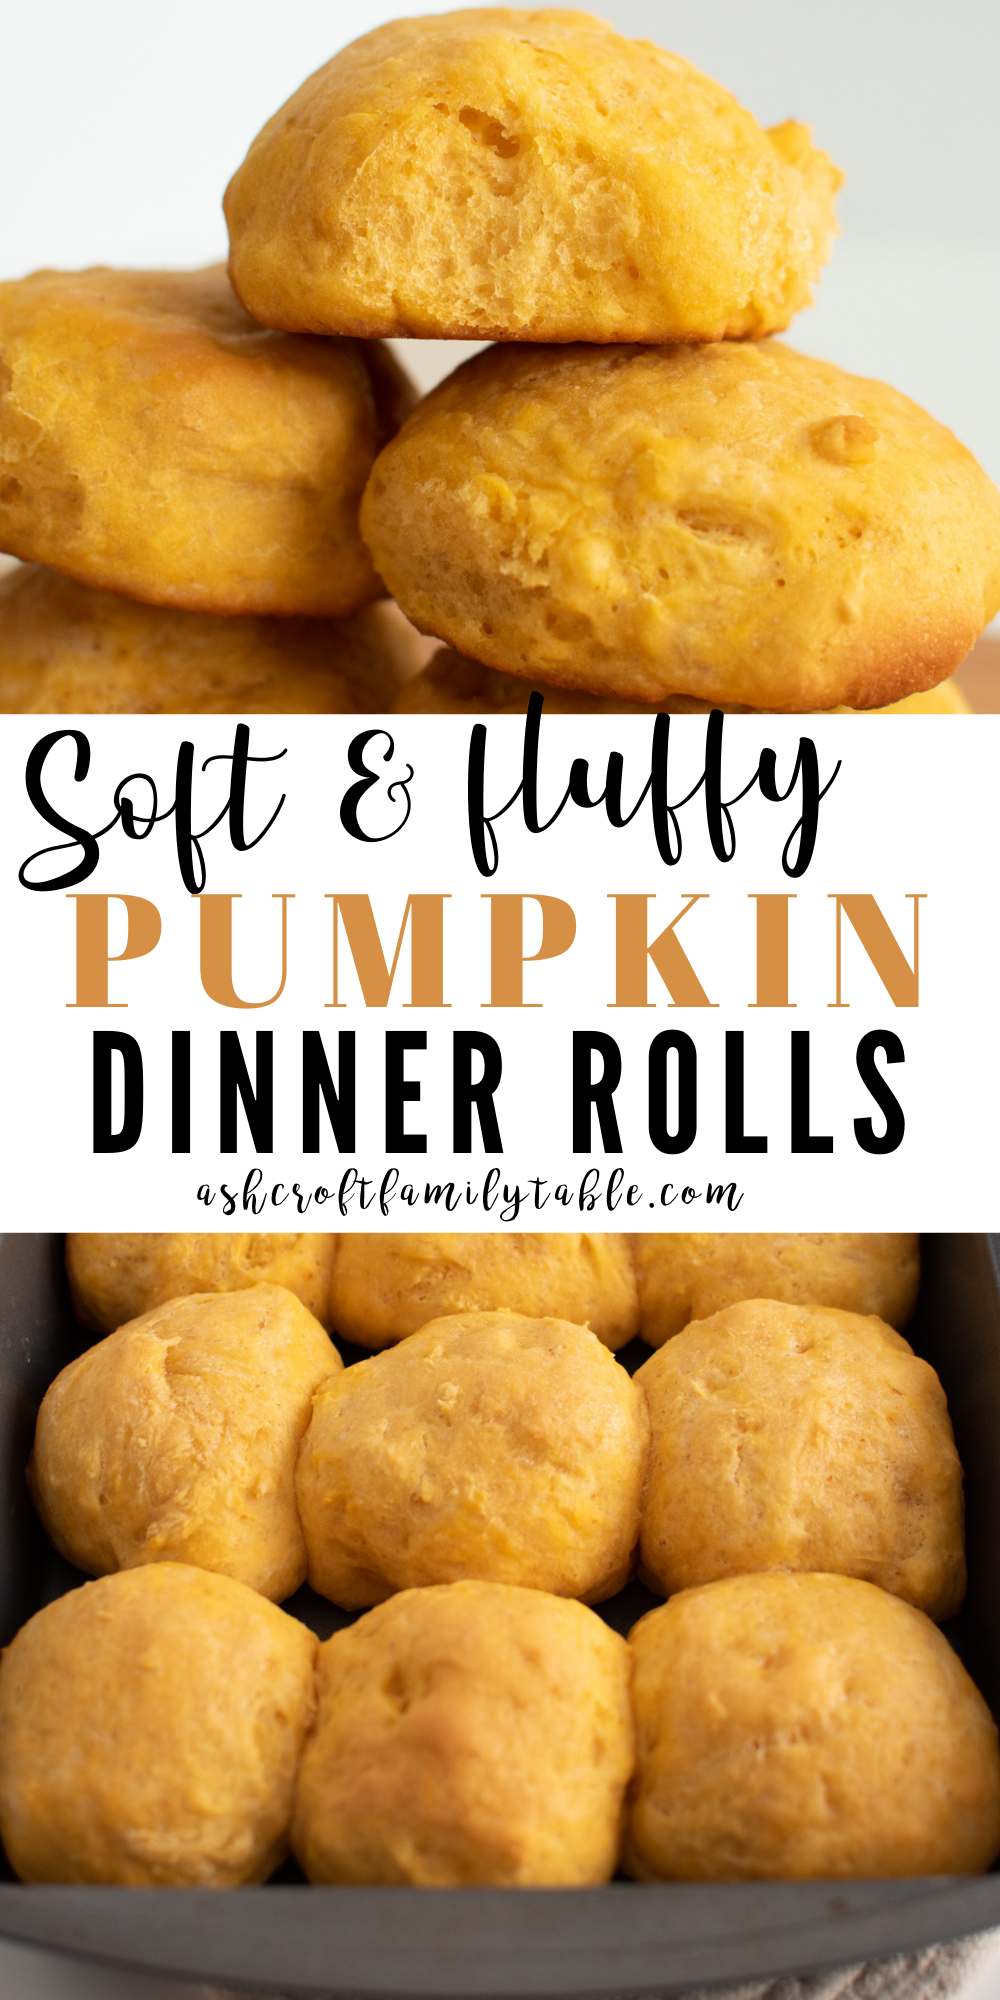 A Pinterest image with text and pumpkin dinner rolls stacked on each other and a pan of pumpkin rolls.